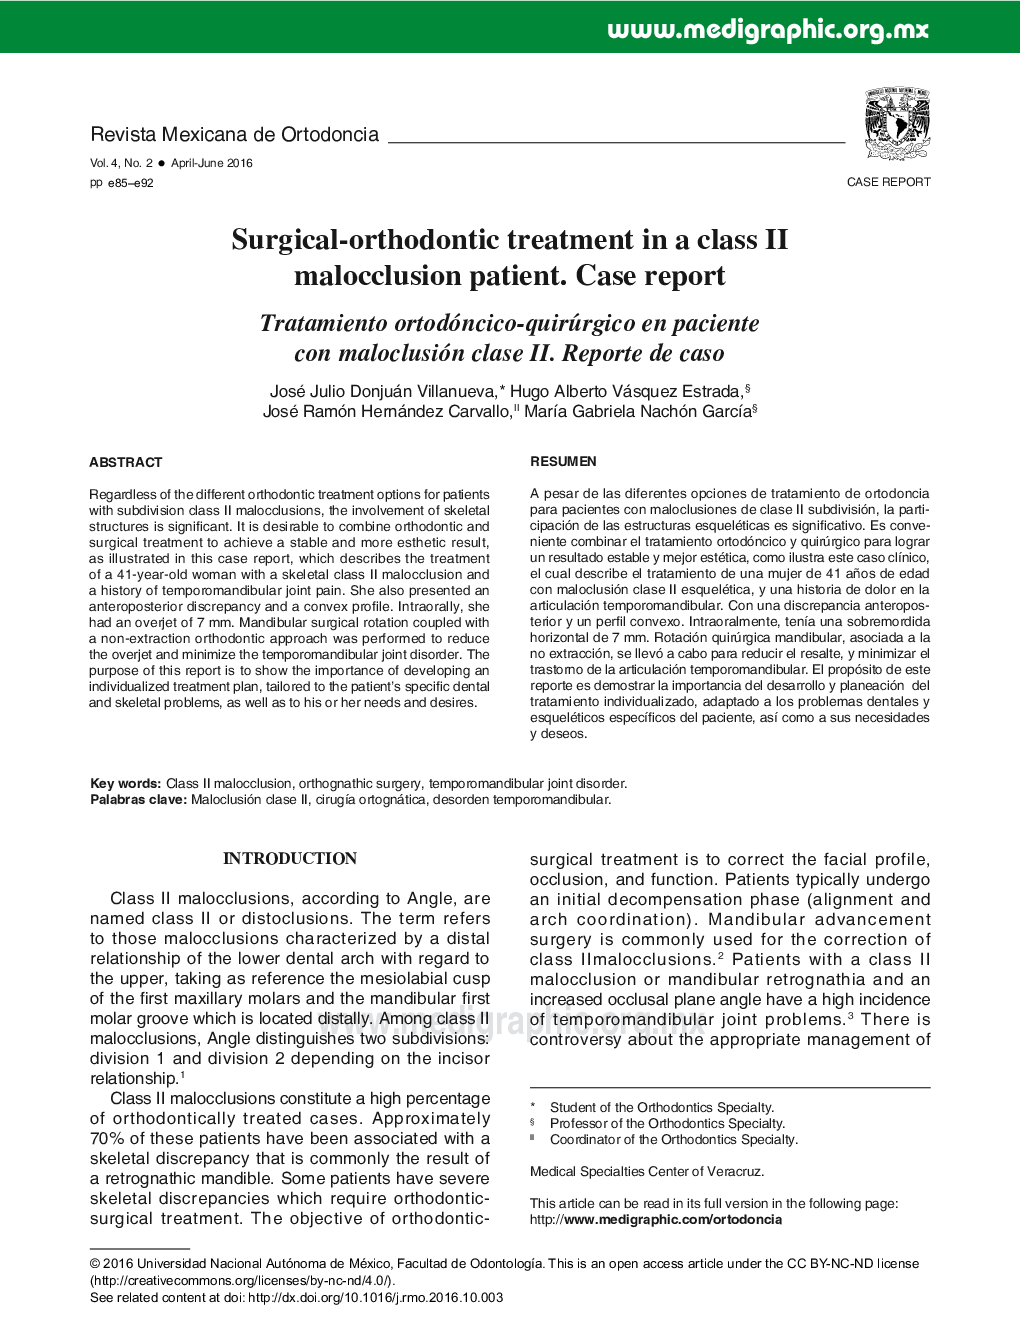 Surgical-orthodontic treatment in a class II malocclusion patient. Case report